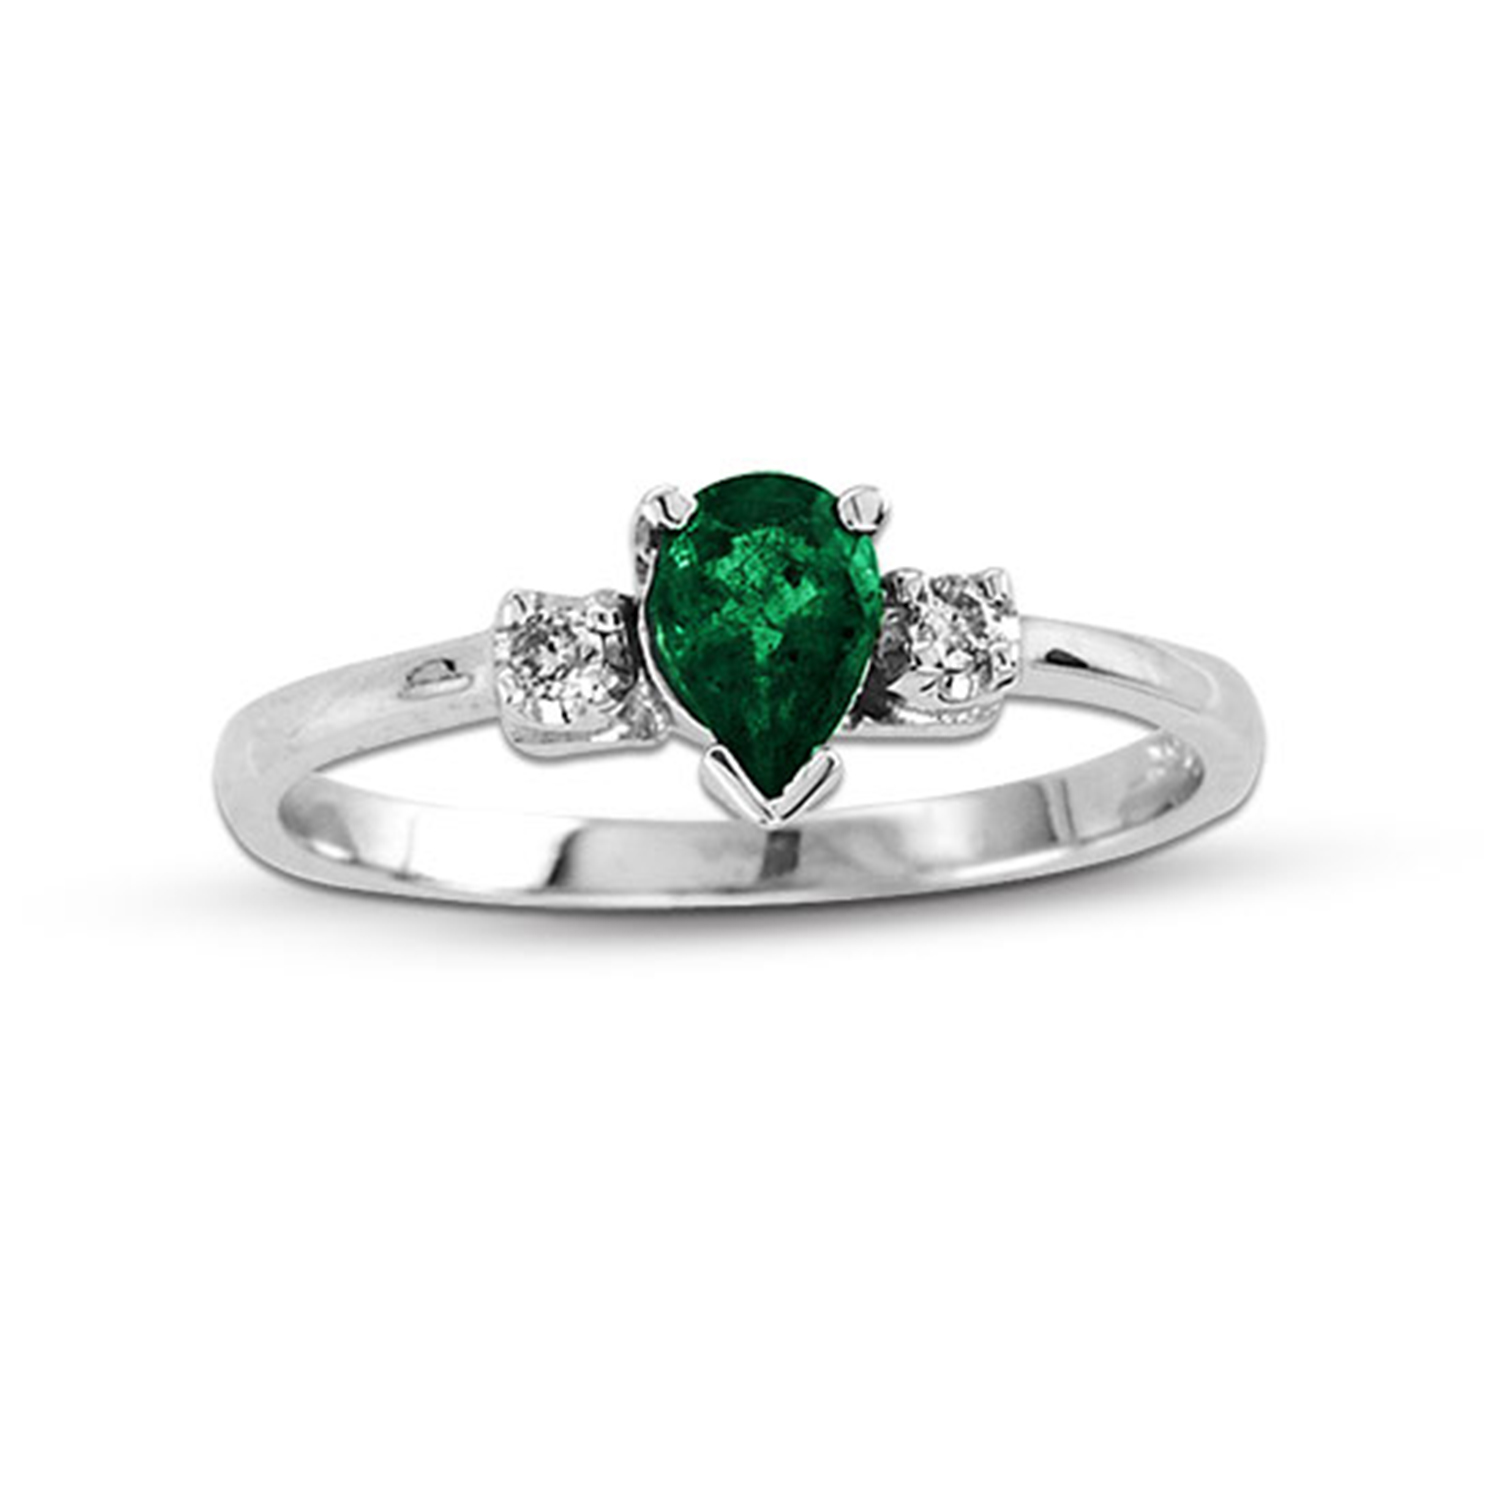 0.45cttw Diamond and Pear Shaped Emerald Ring set in 14k Gold